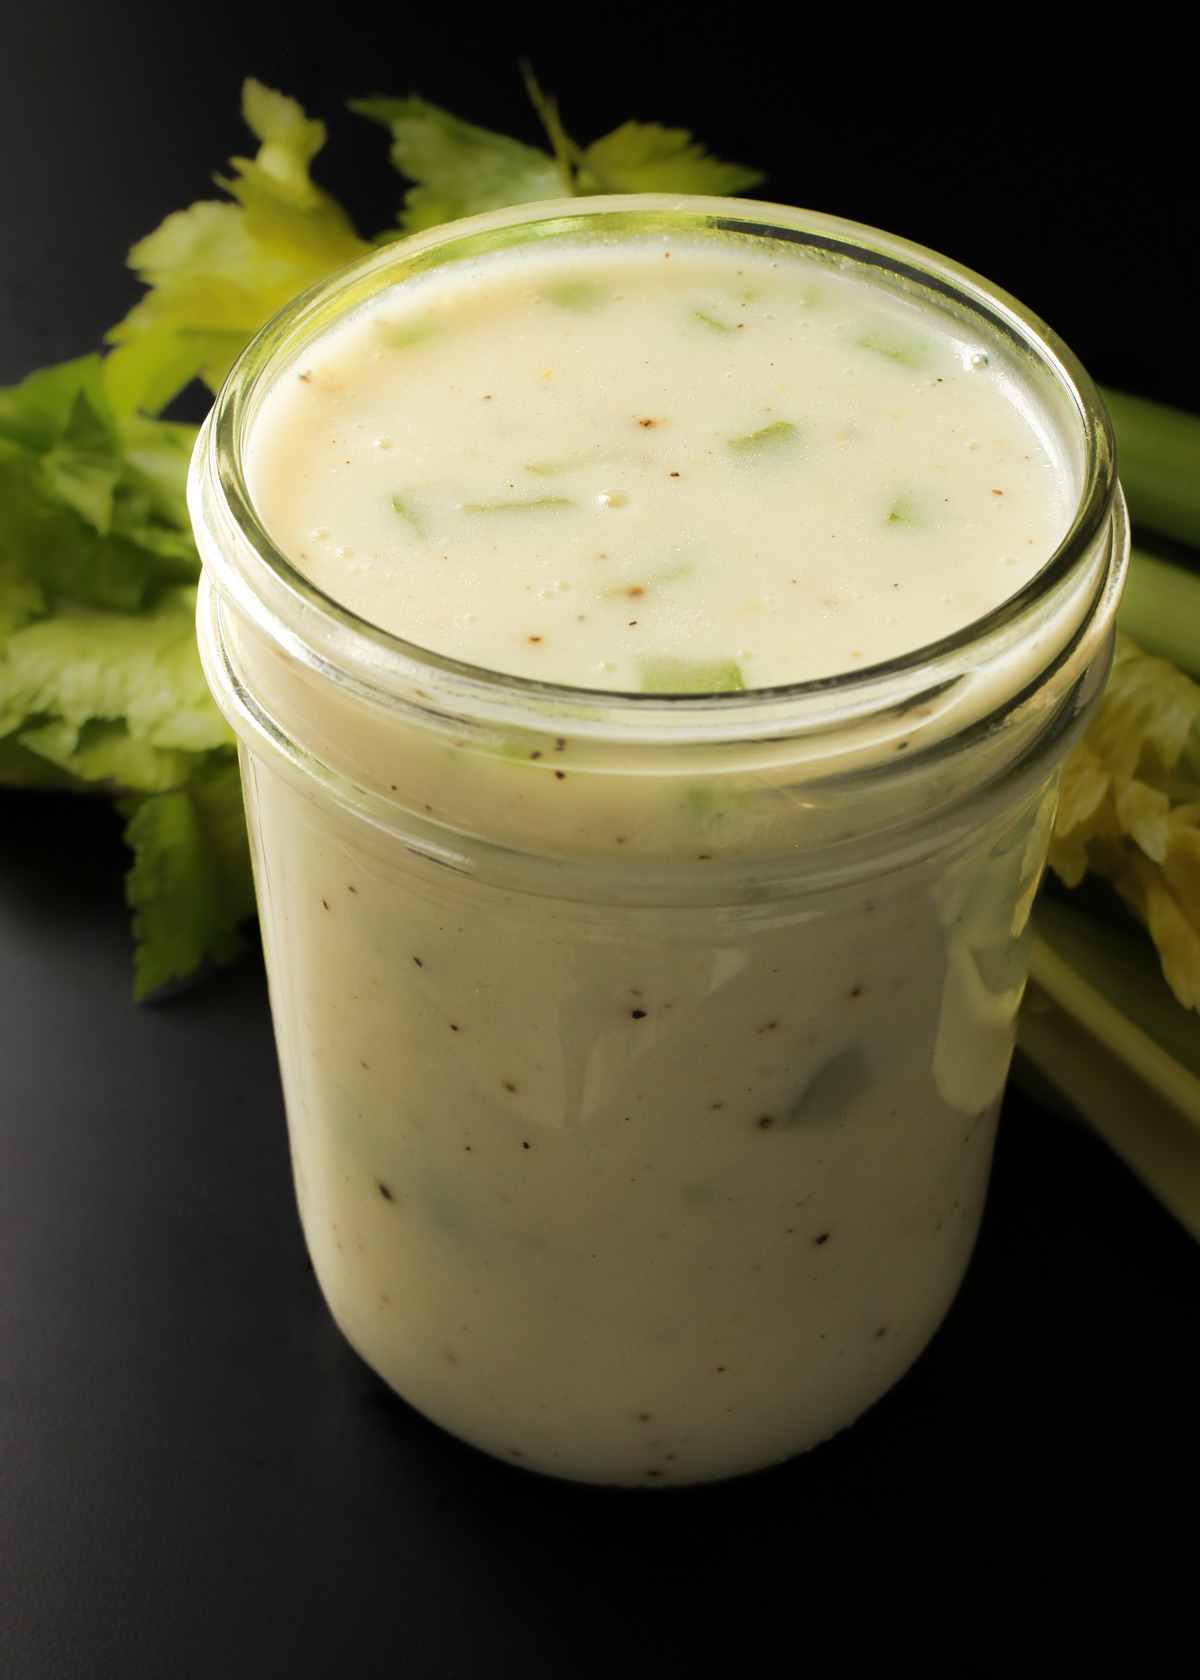 jar of homemade cream of celery soup on black table with stalk of celery in background.